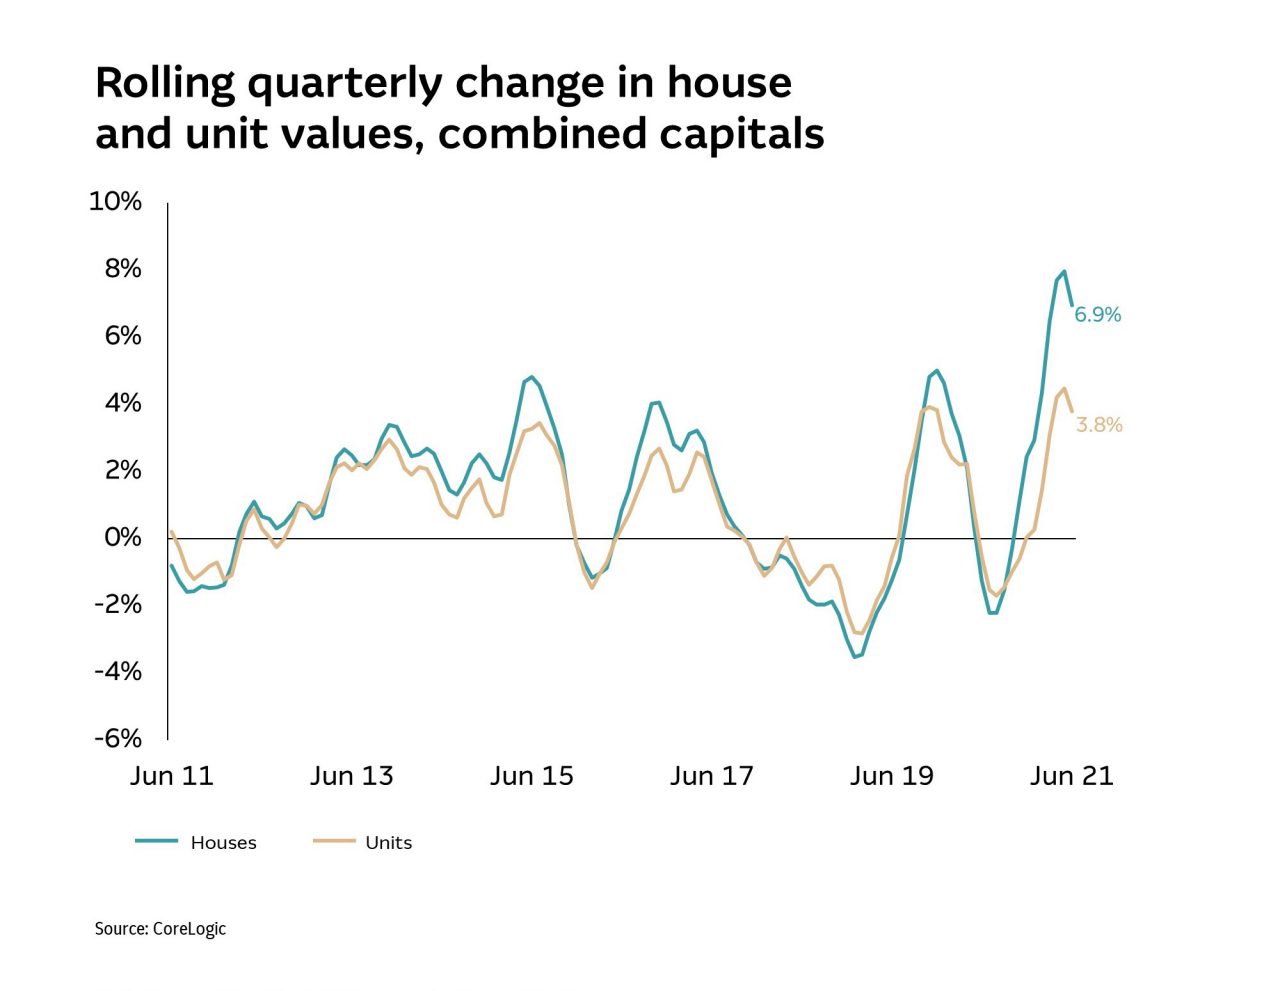 Rolling quarterly change in house and unit values, combined capitals